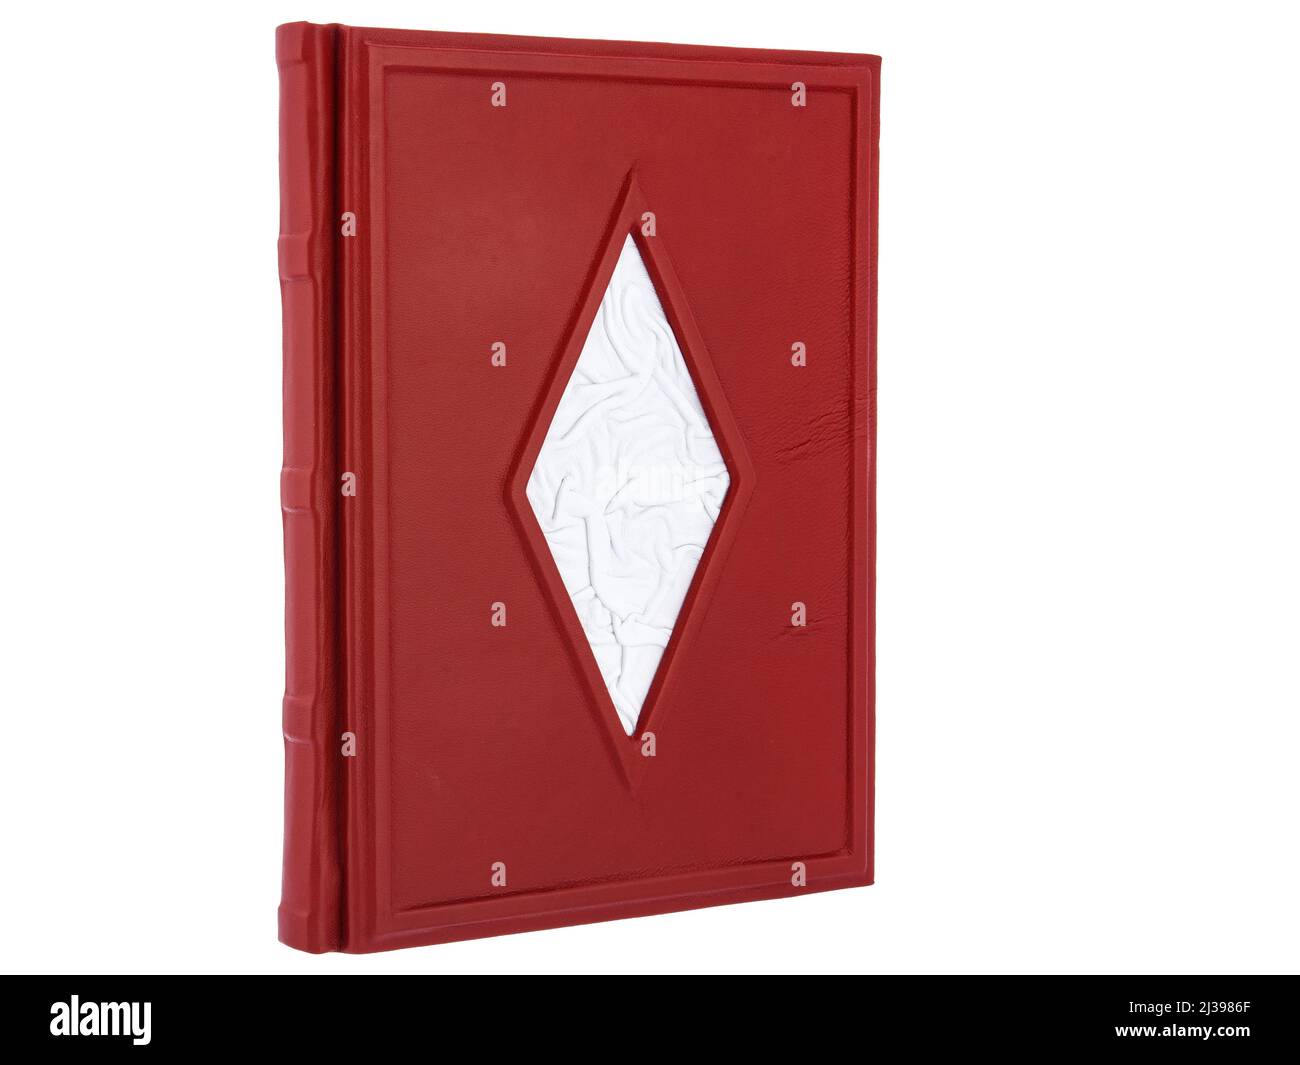 Red Silver Leather mockup book with cover color isolated on white background, front view. With empty lable and metal fittings. Stock Photo